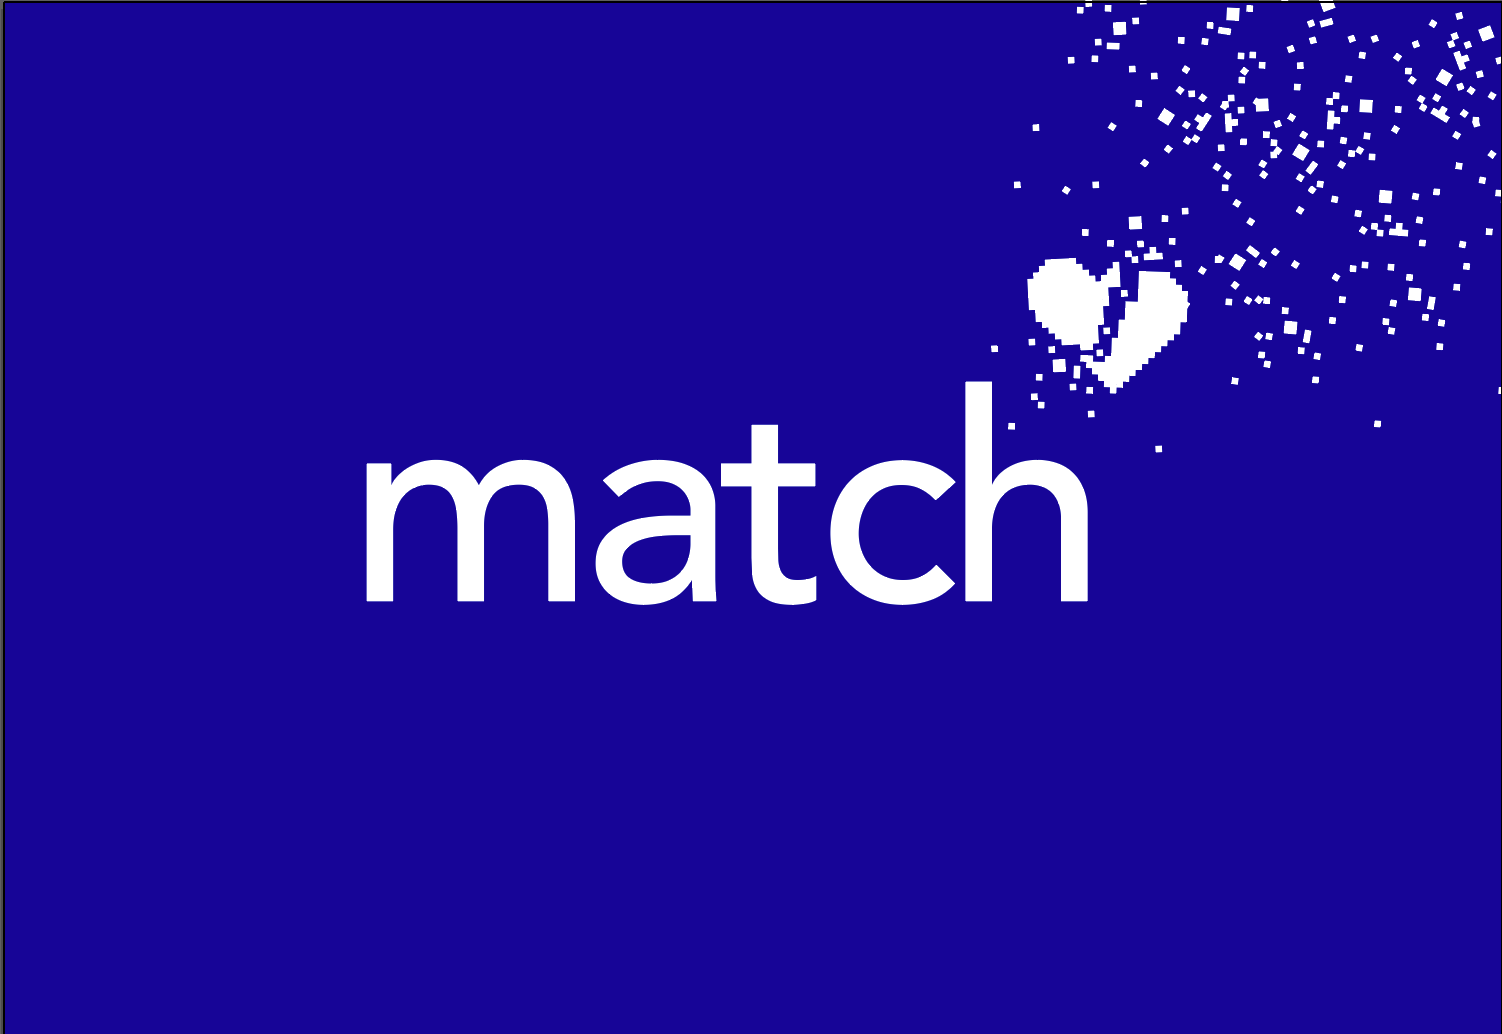 Match.com Is Being Sued for Using Fake Profiles to Boost Paid Subscriptions